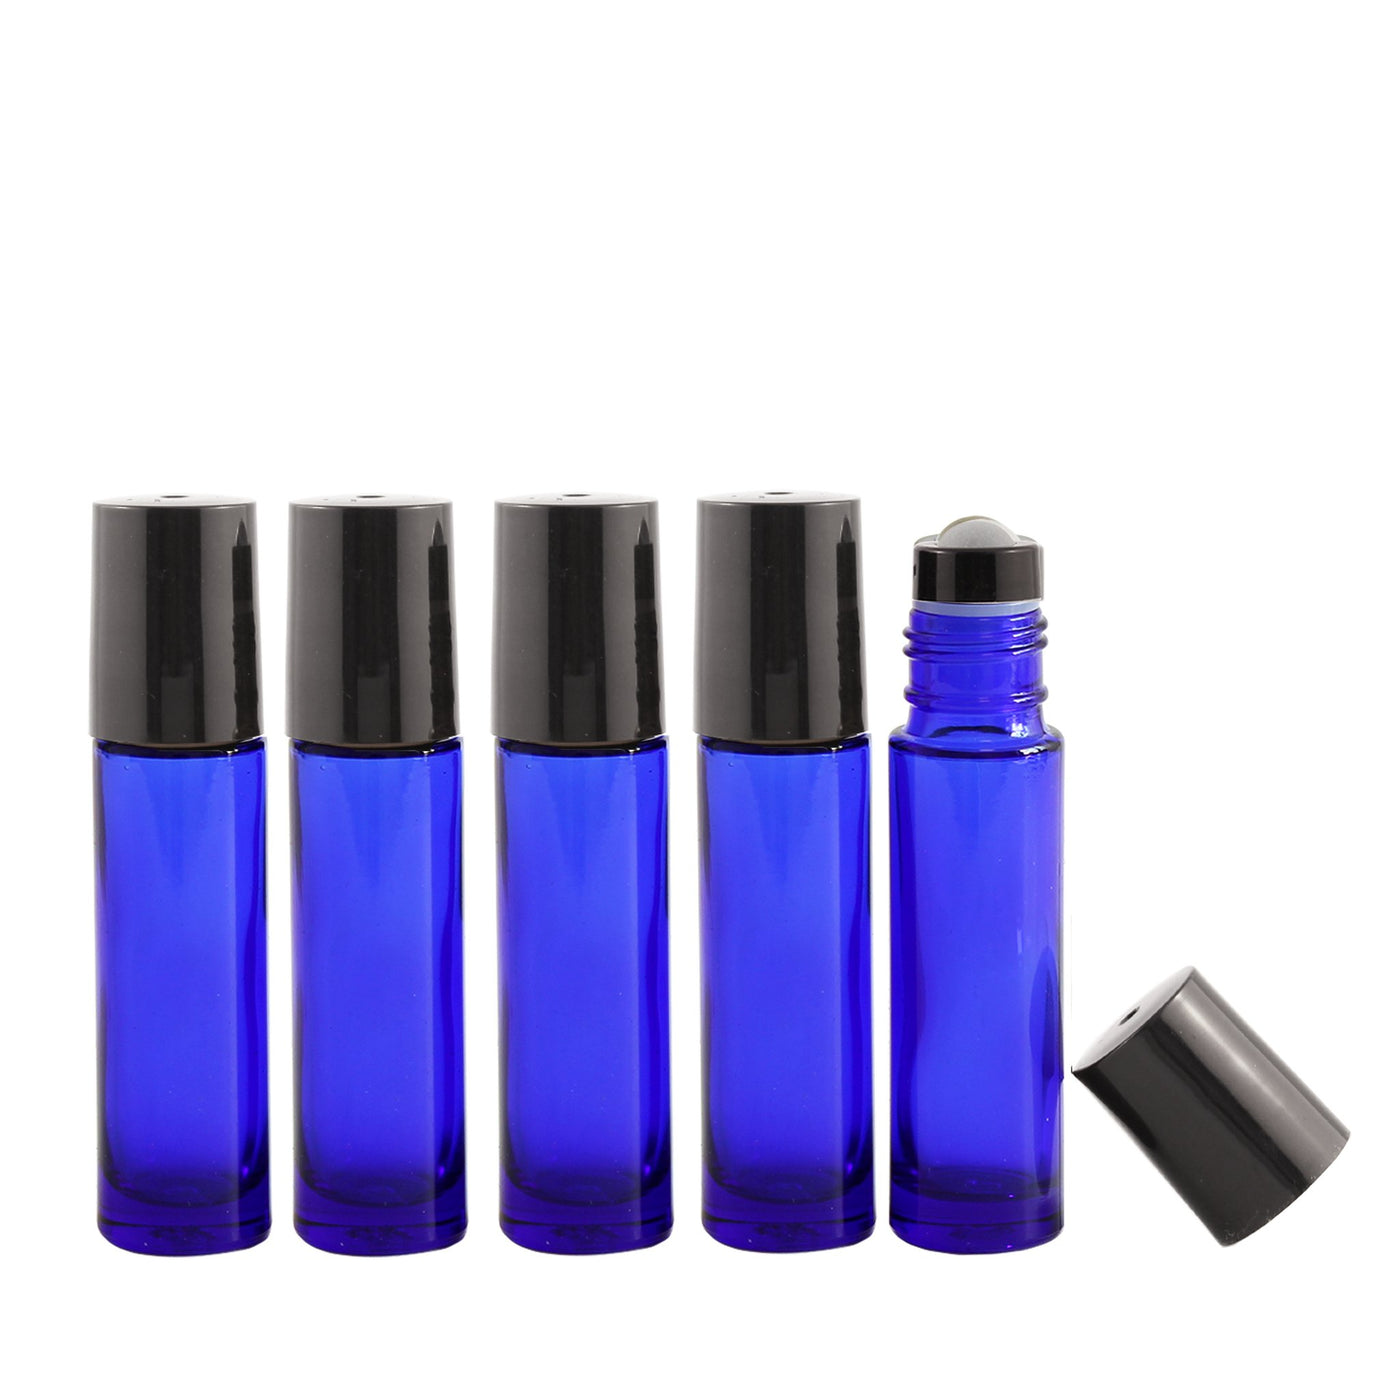 10ml Cobalt Blue Glass Roller Bottle with Black Lid and Stainless Steel Roller Balls - Oil Life Canada - Canada's Best Essential Oil Supplies